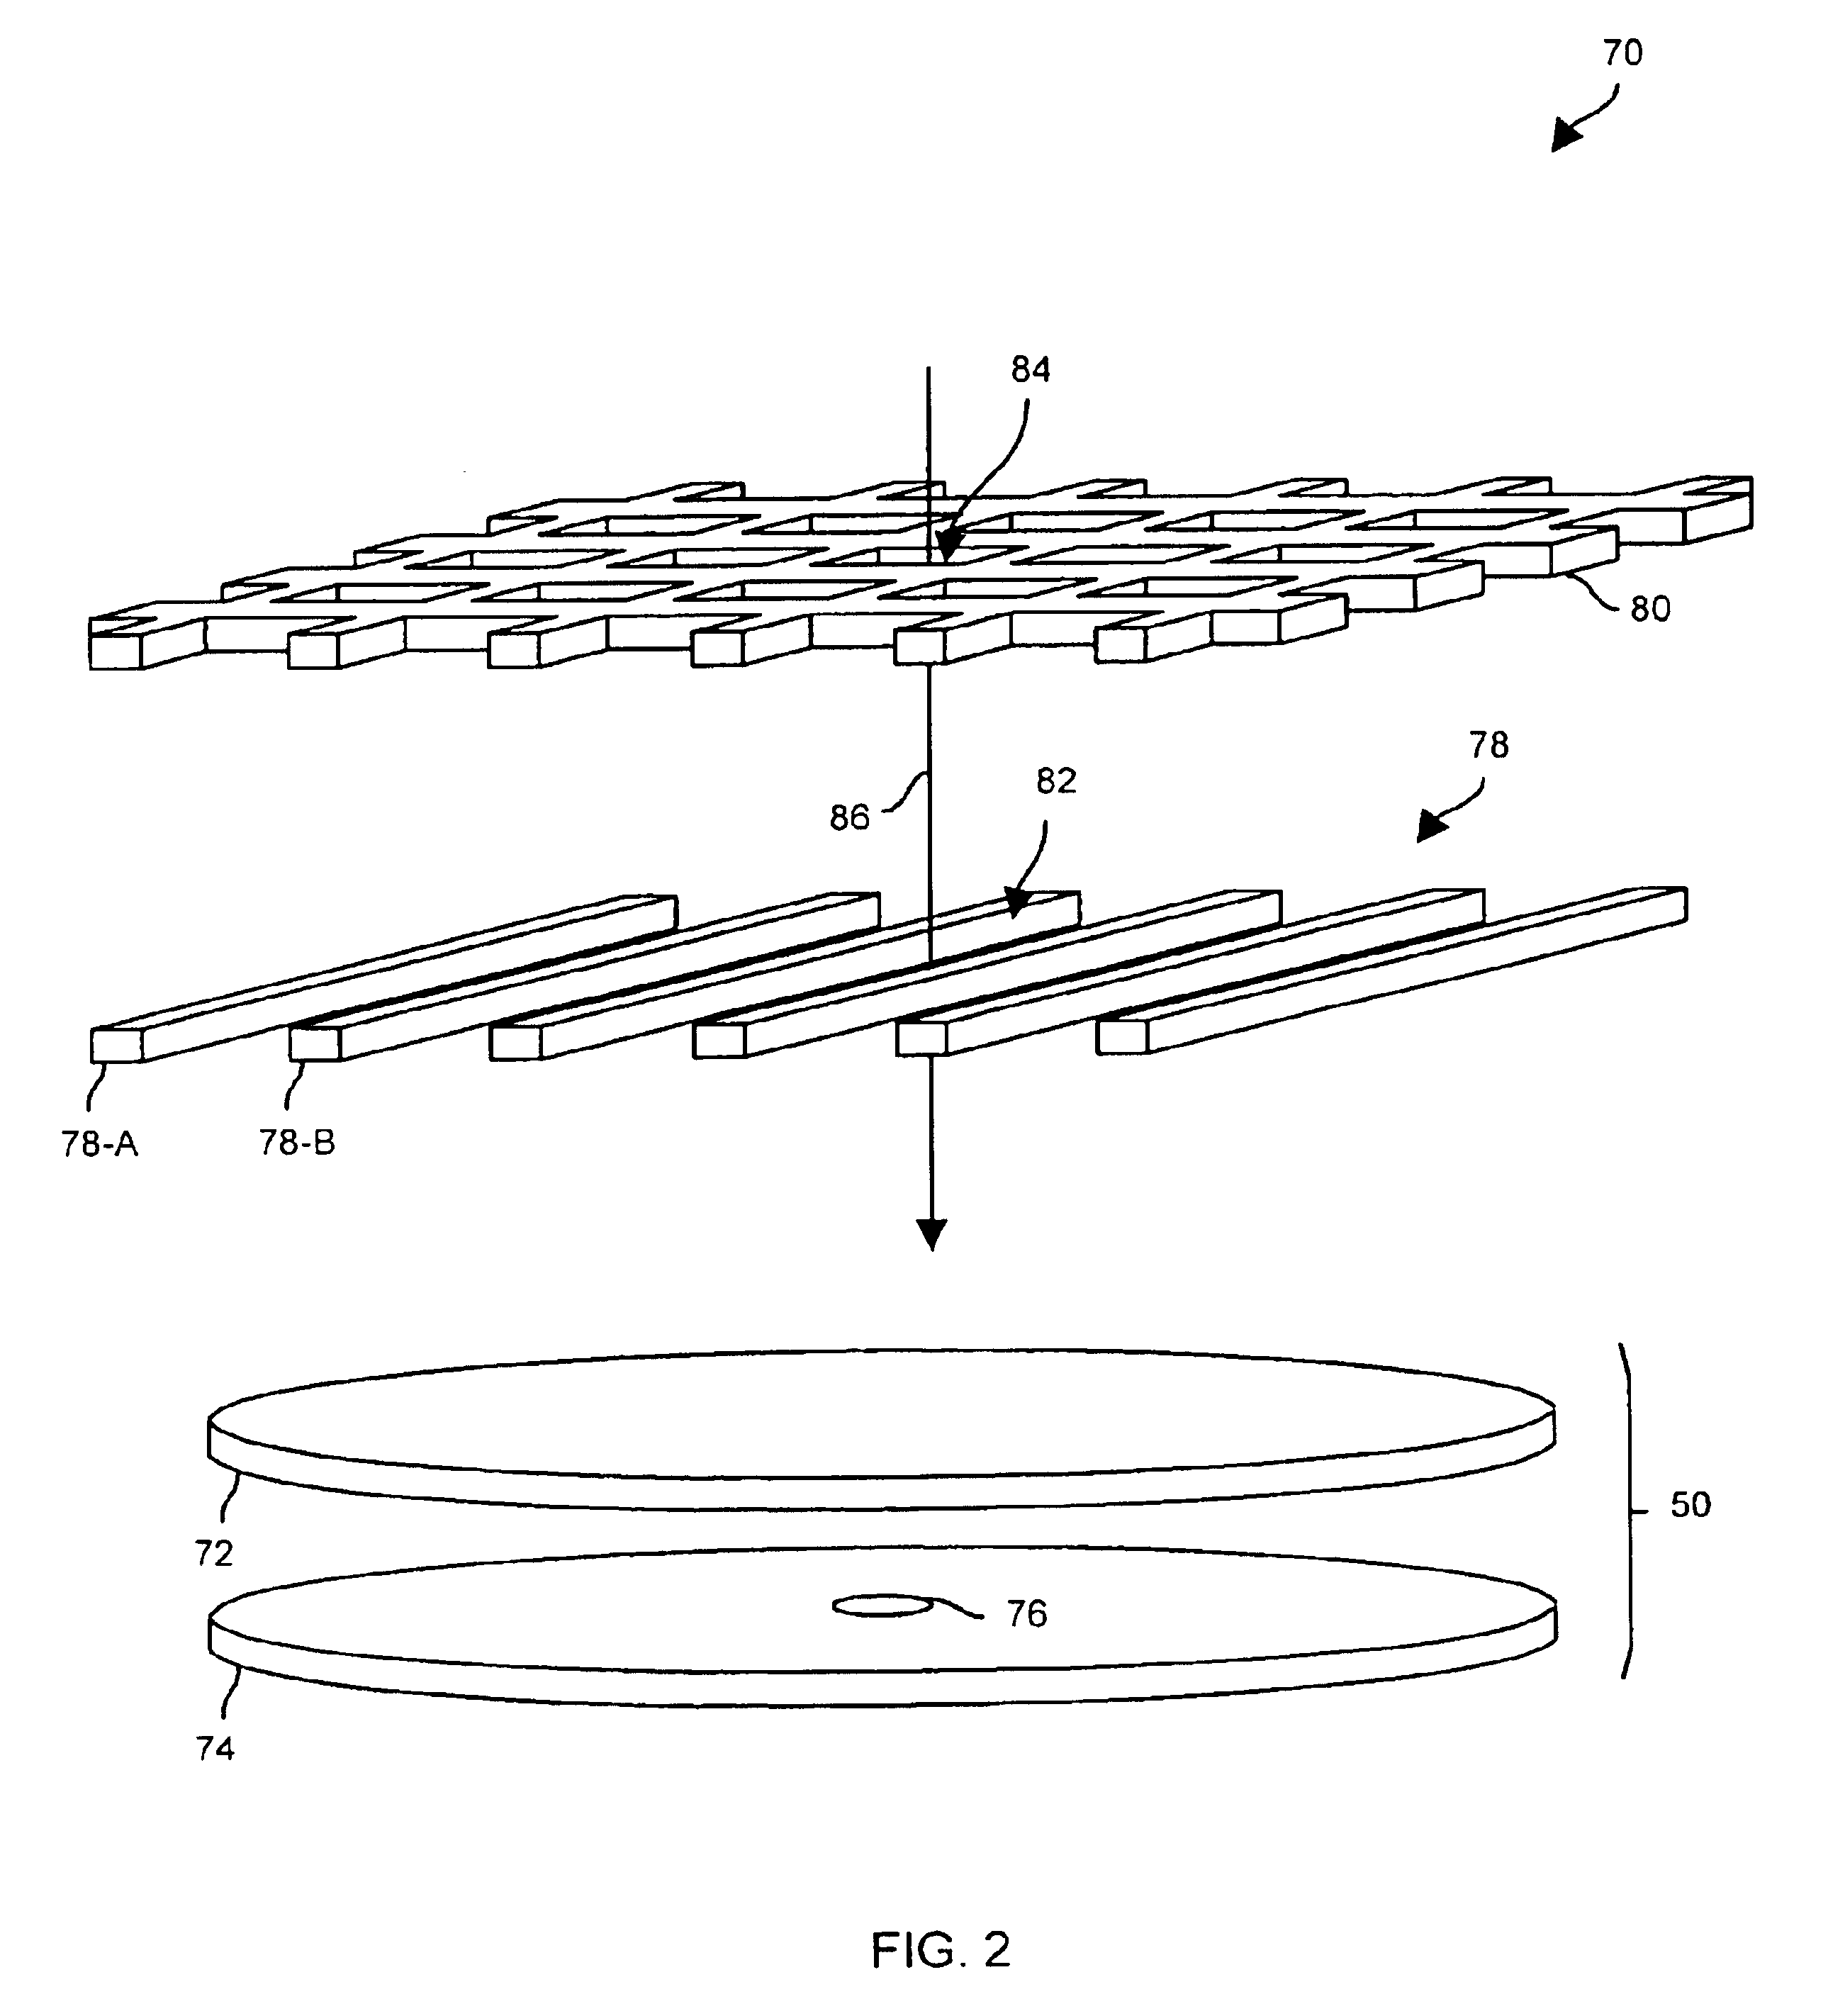 Systems and methods for sensing an acoustic signal using microelectromechanical systems technology